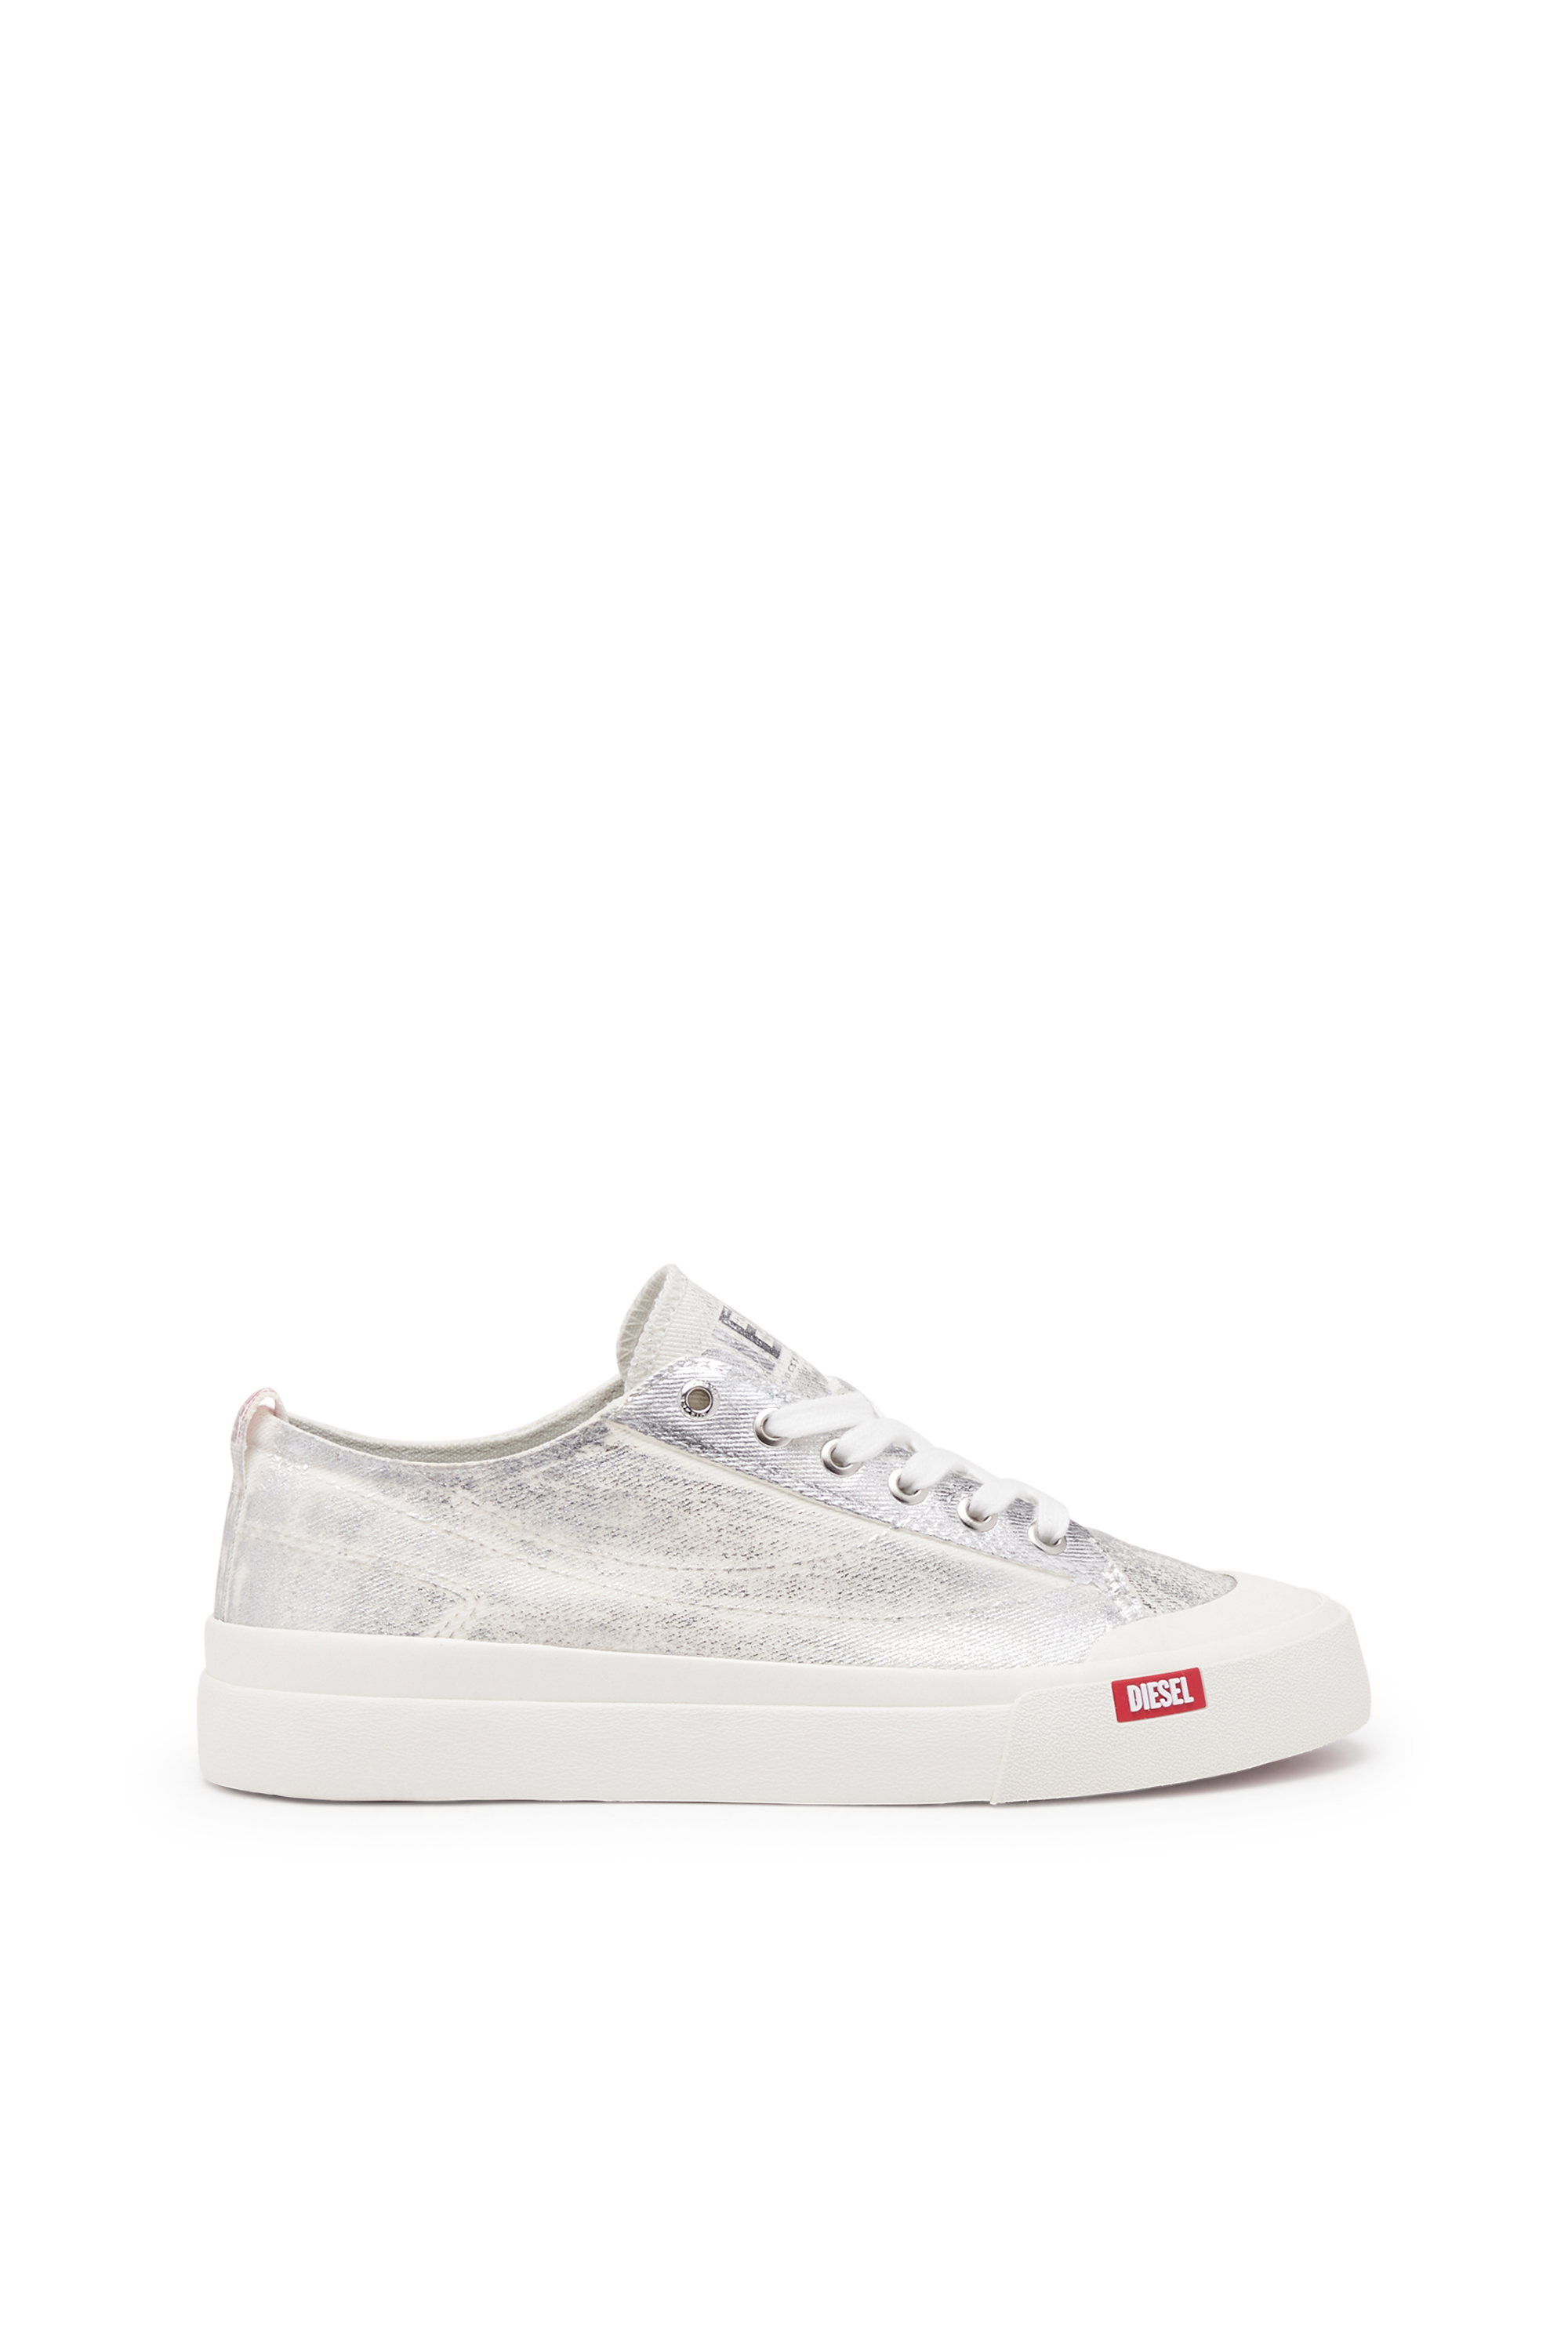 Diesel - S-ATHOS LOW W, Woman S-Athos Low-Distressed sneakers in metallic canvas in Silver - Image 1